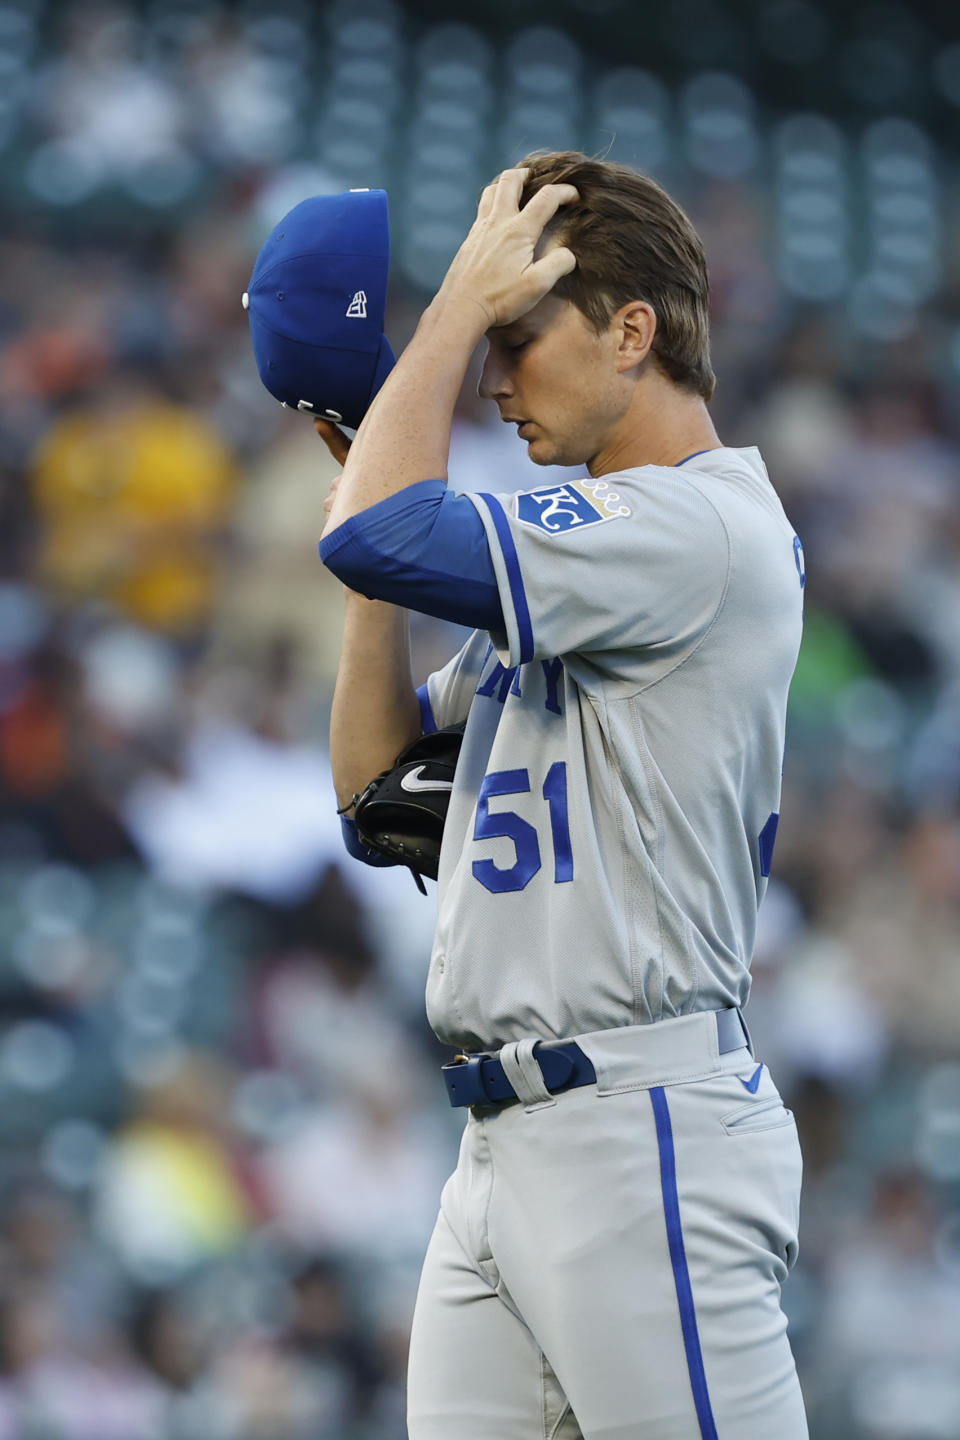 Kansas City Royals starting pitcher Brady Singer reacts after walking in a run in the third inning of a baseball game against the San Francisco Giants in San Francisco, Monday, June 13, 2022. (AP Photo/Josie Lepe)